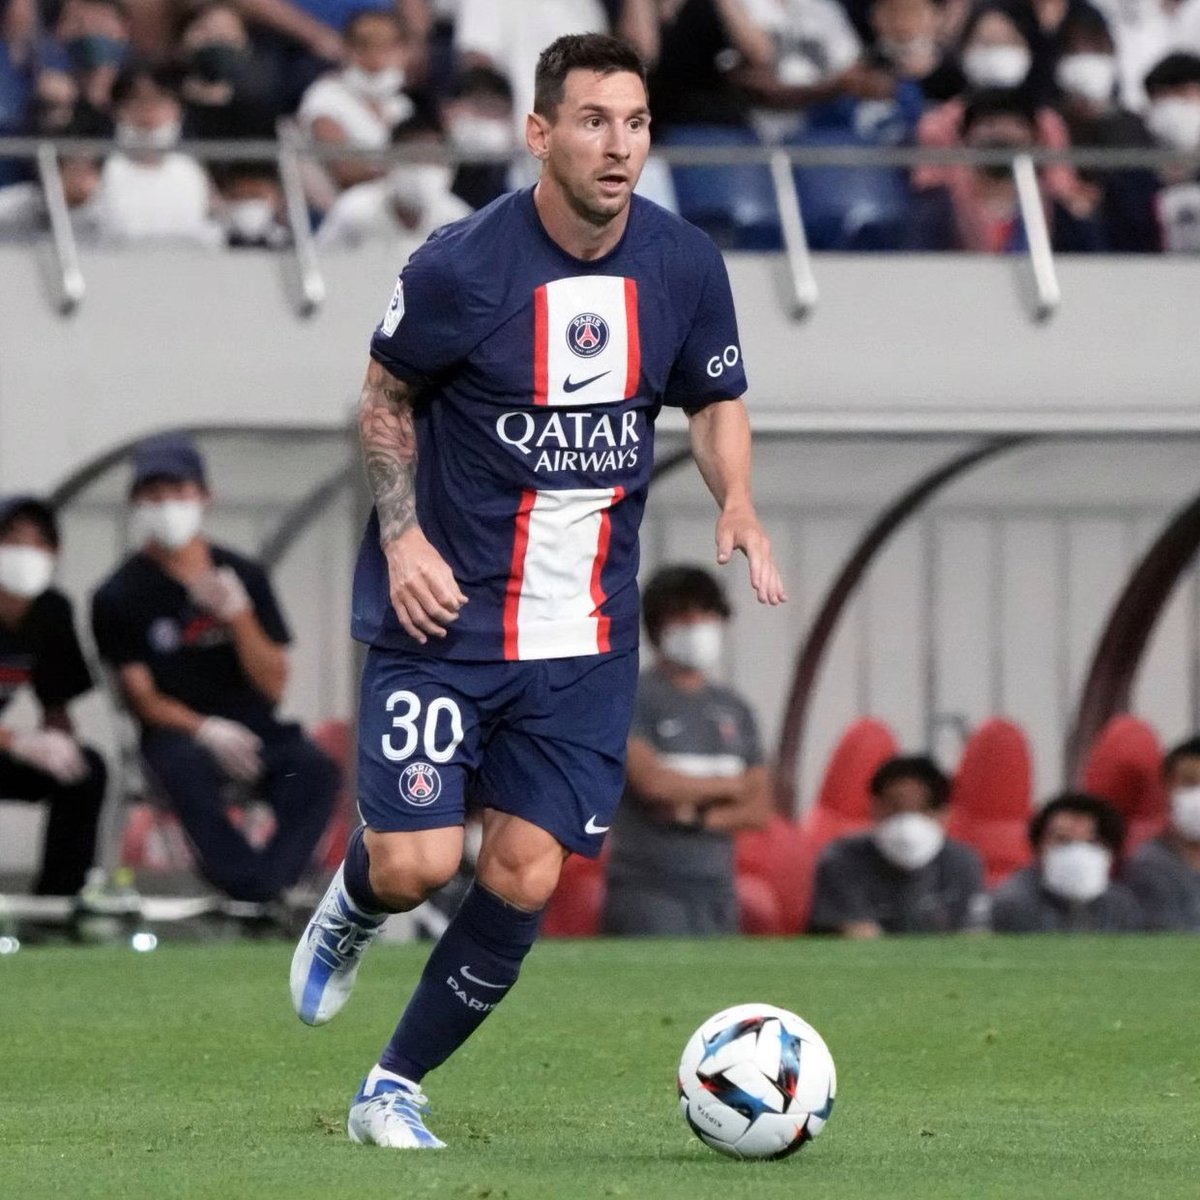 🔎 | FOCUS

Lionel Messi produced a standout playmaking performance as PSG beat Toulouse 3:0 this evening:

👌 91 touches
🅰️ 2 assists
🎁 3 big chances created
🔑 4 key passes
👟 55/66 accurate passes
💨 2/5 successful dribbles
📈 9.1 SofaScore rating

🔥🔥

#TFCPSG